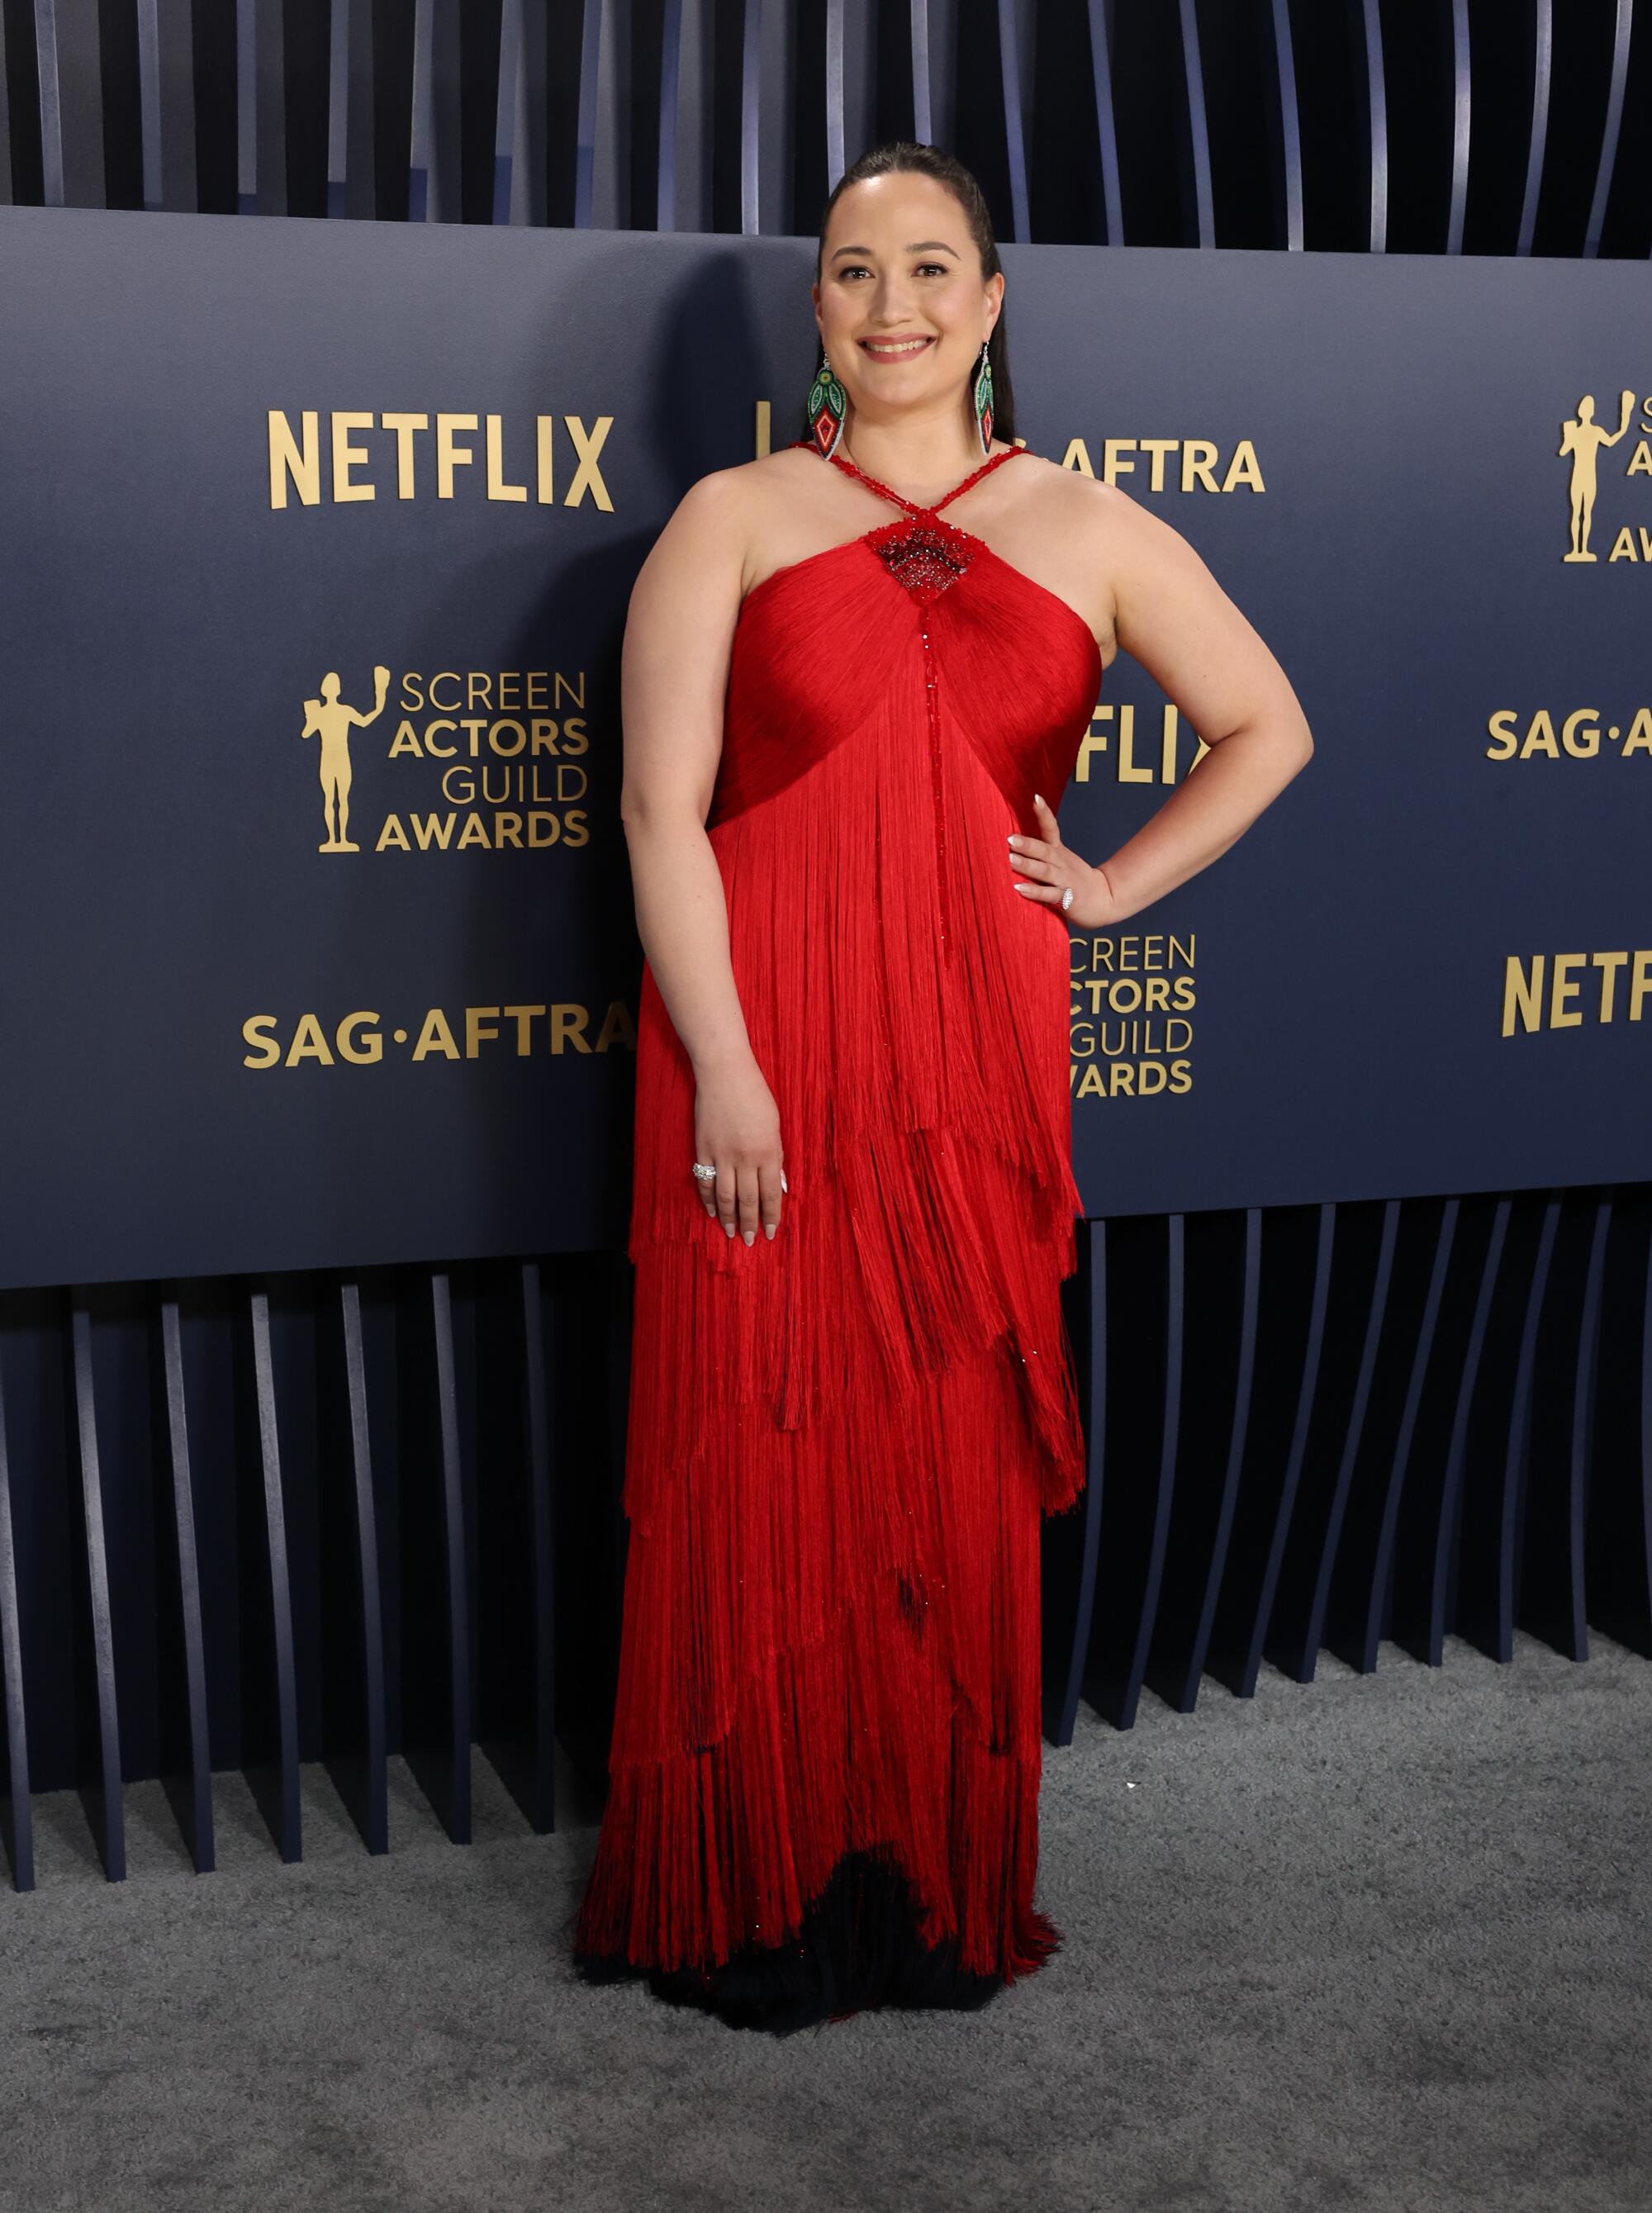 Lily Gladstone wears a red halter dress at the SAG Awards.